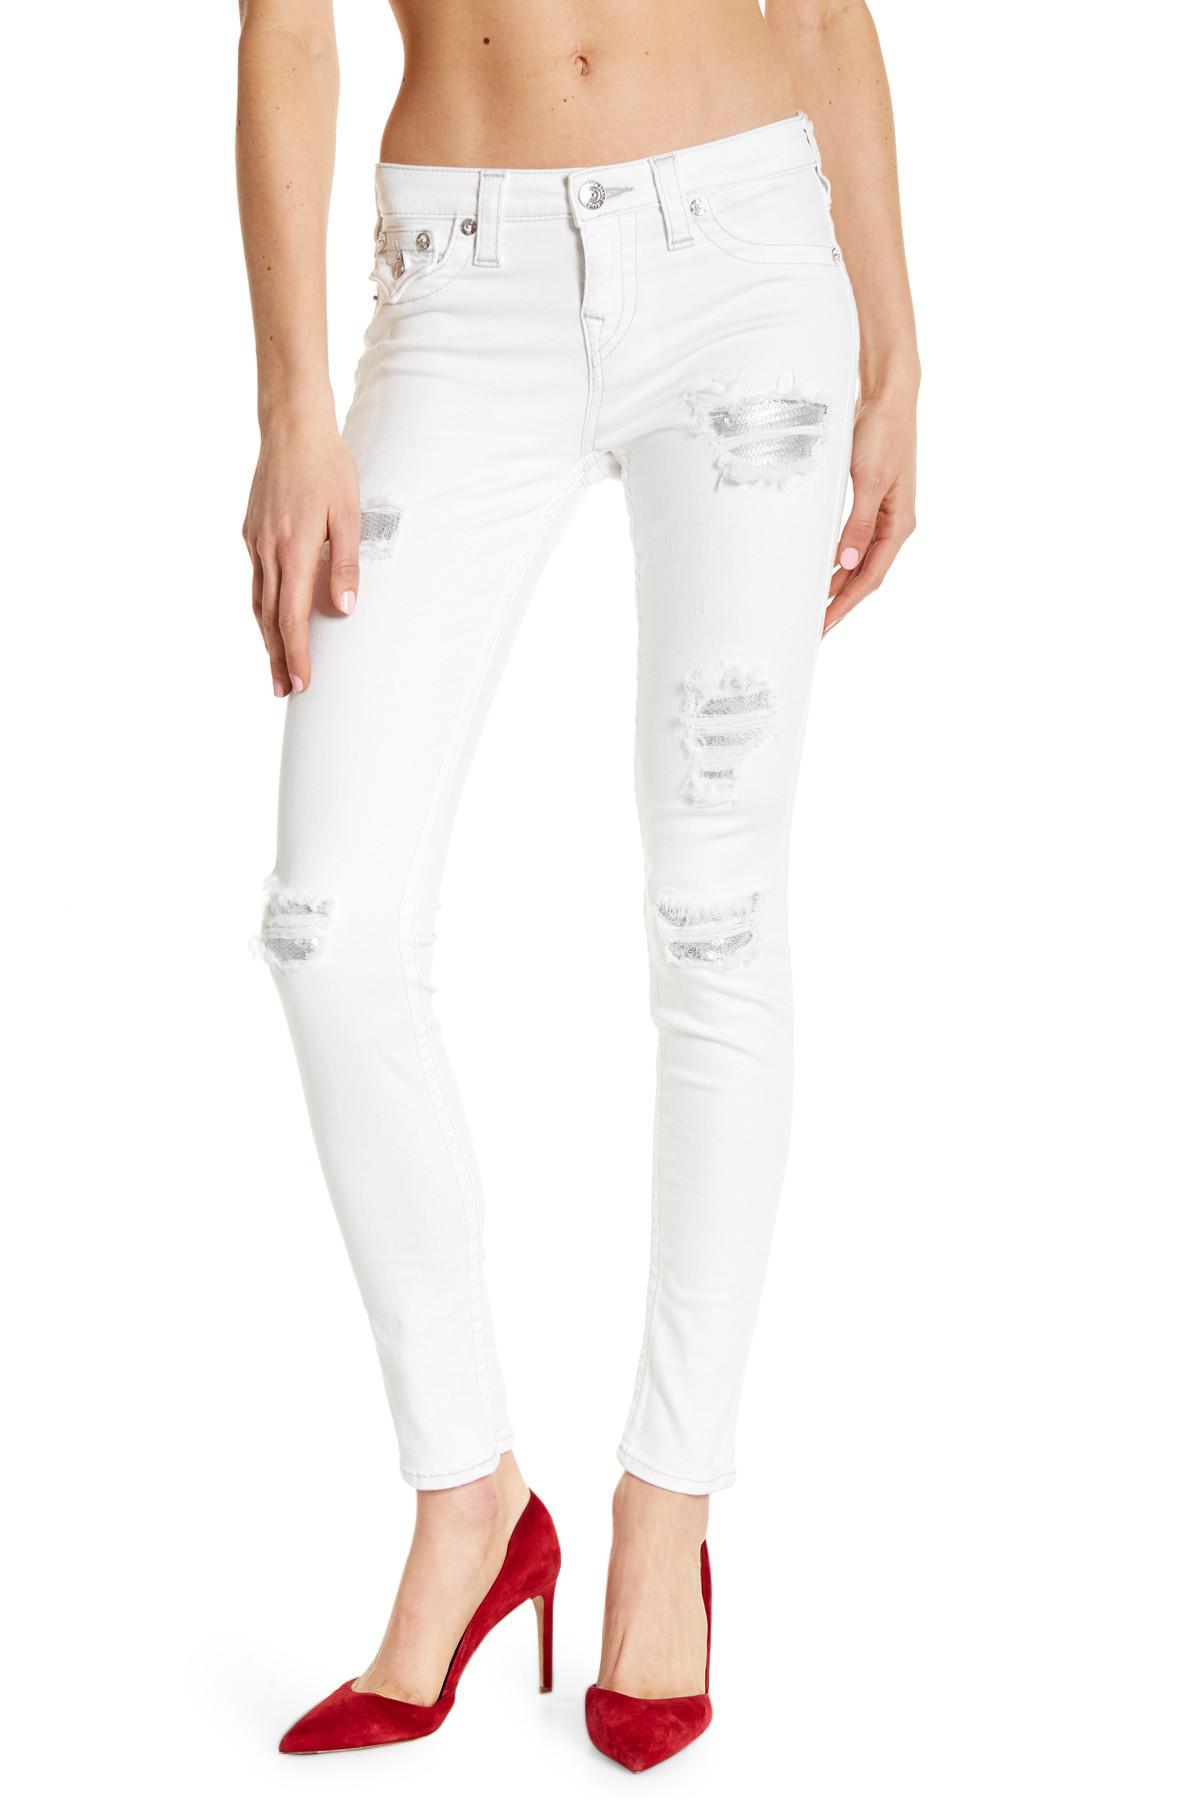 white sequin jeans